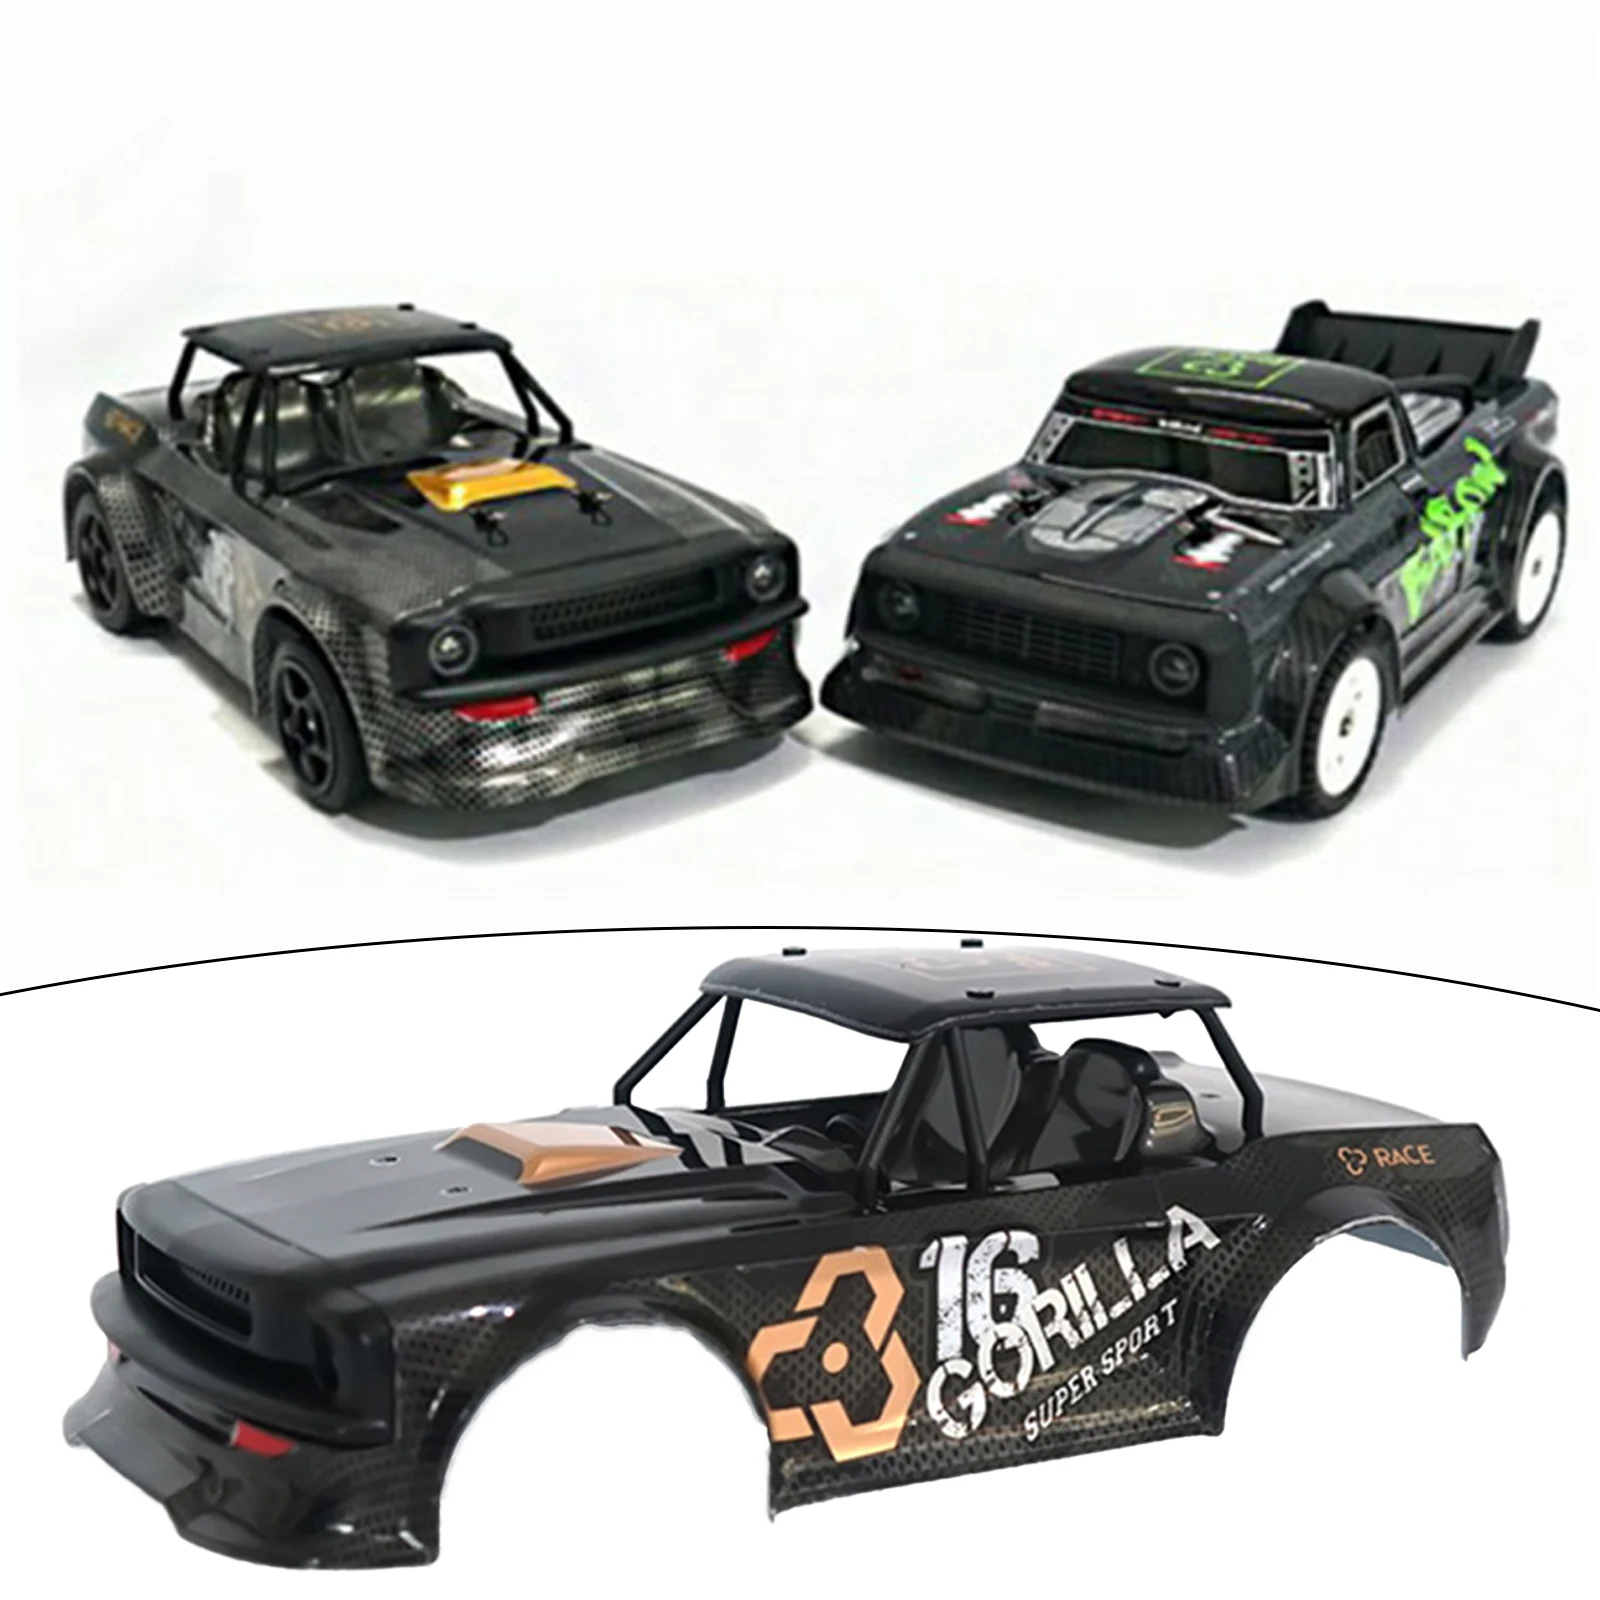 Body Shell Cover for SG-1604 RC Racing Truck Modified Upgrade Accessories